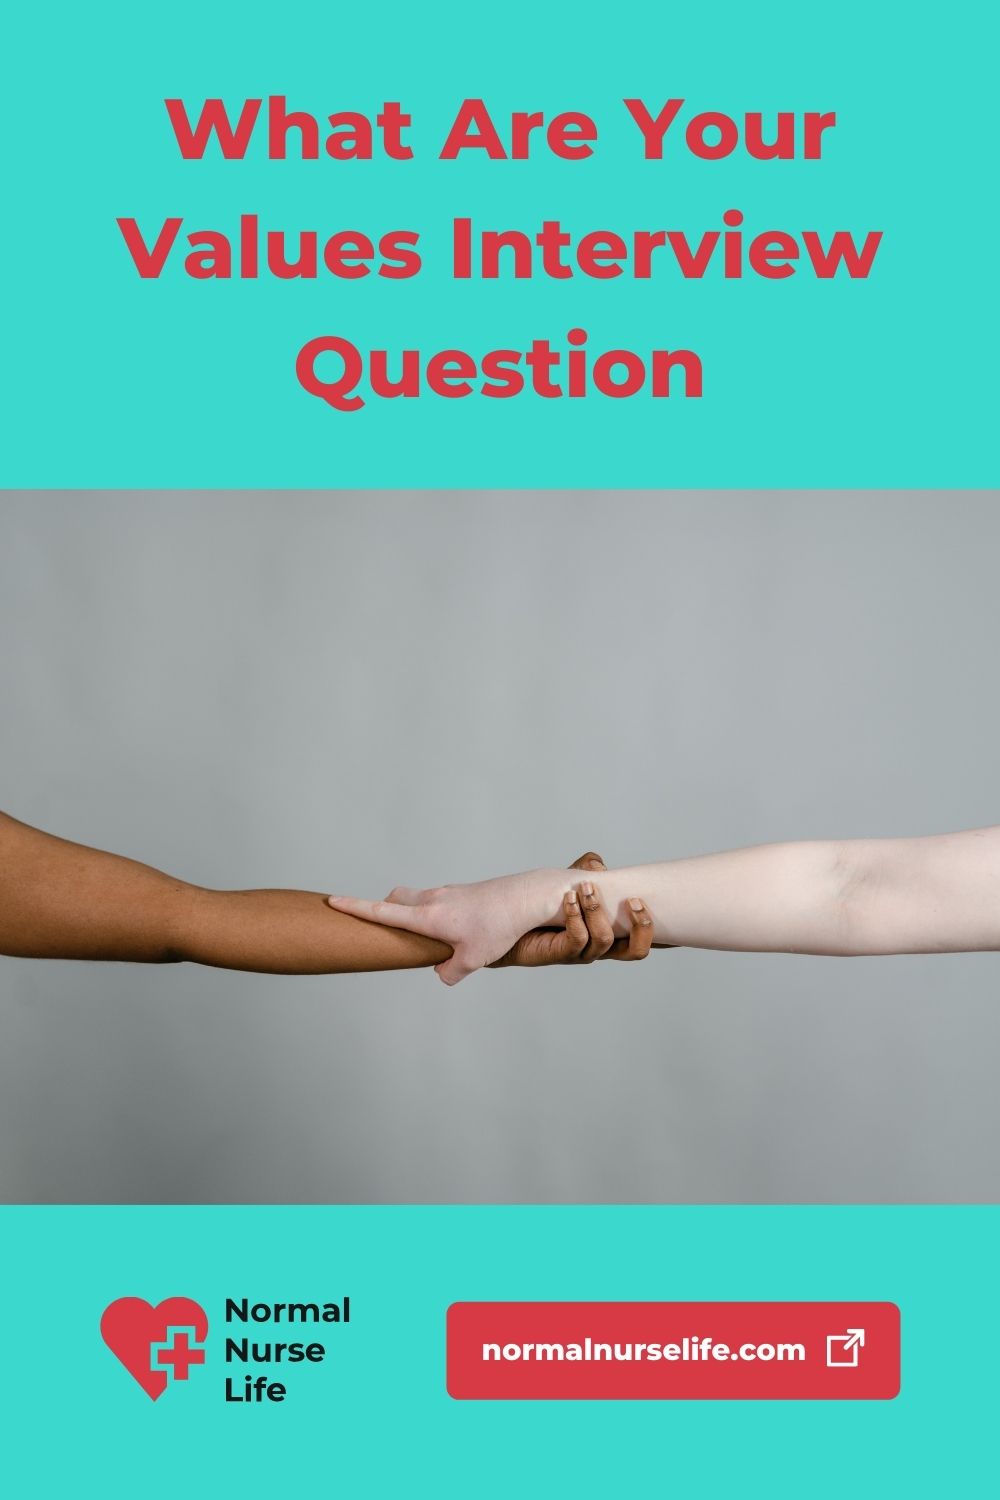 What are your values interview question